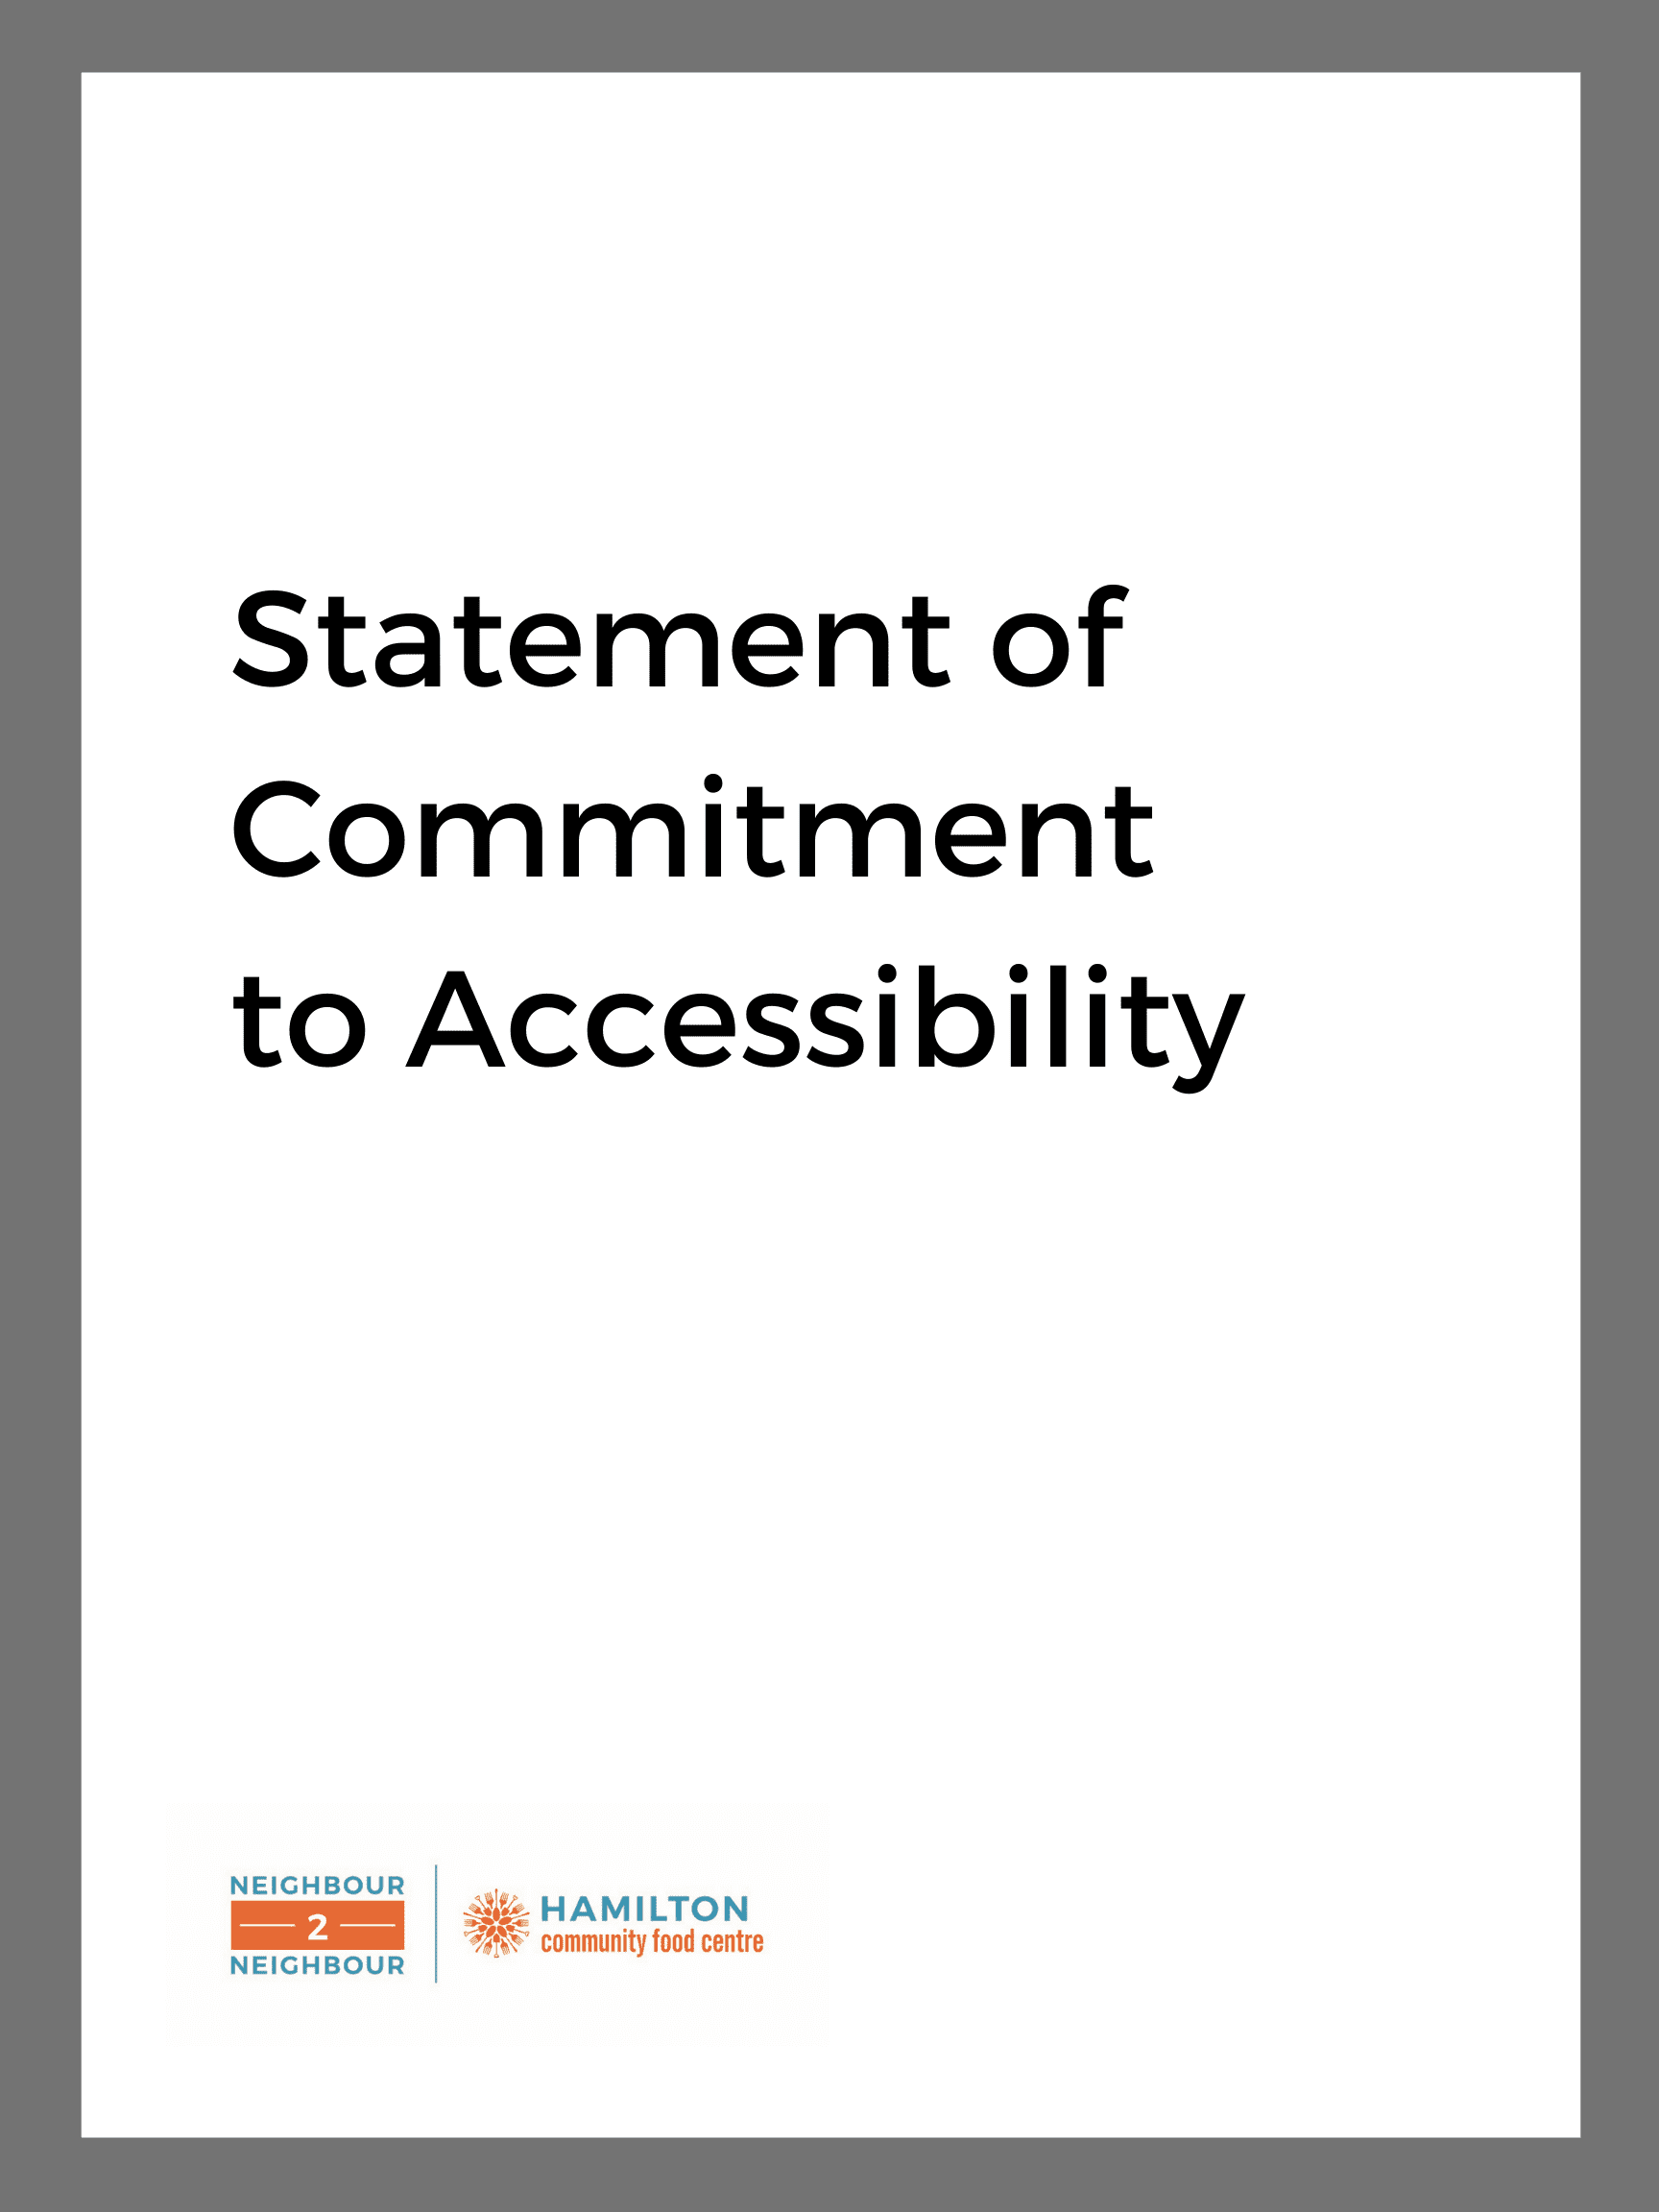 document image: statement of Commitment to Accessibility